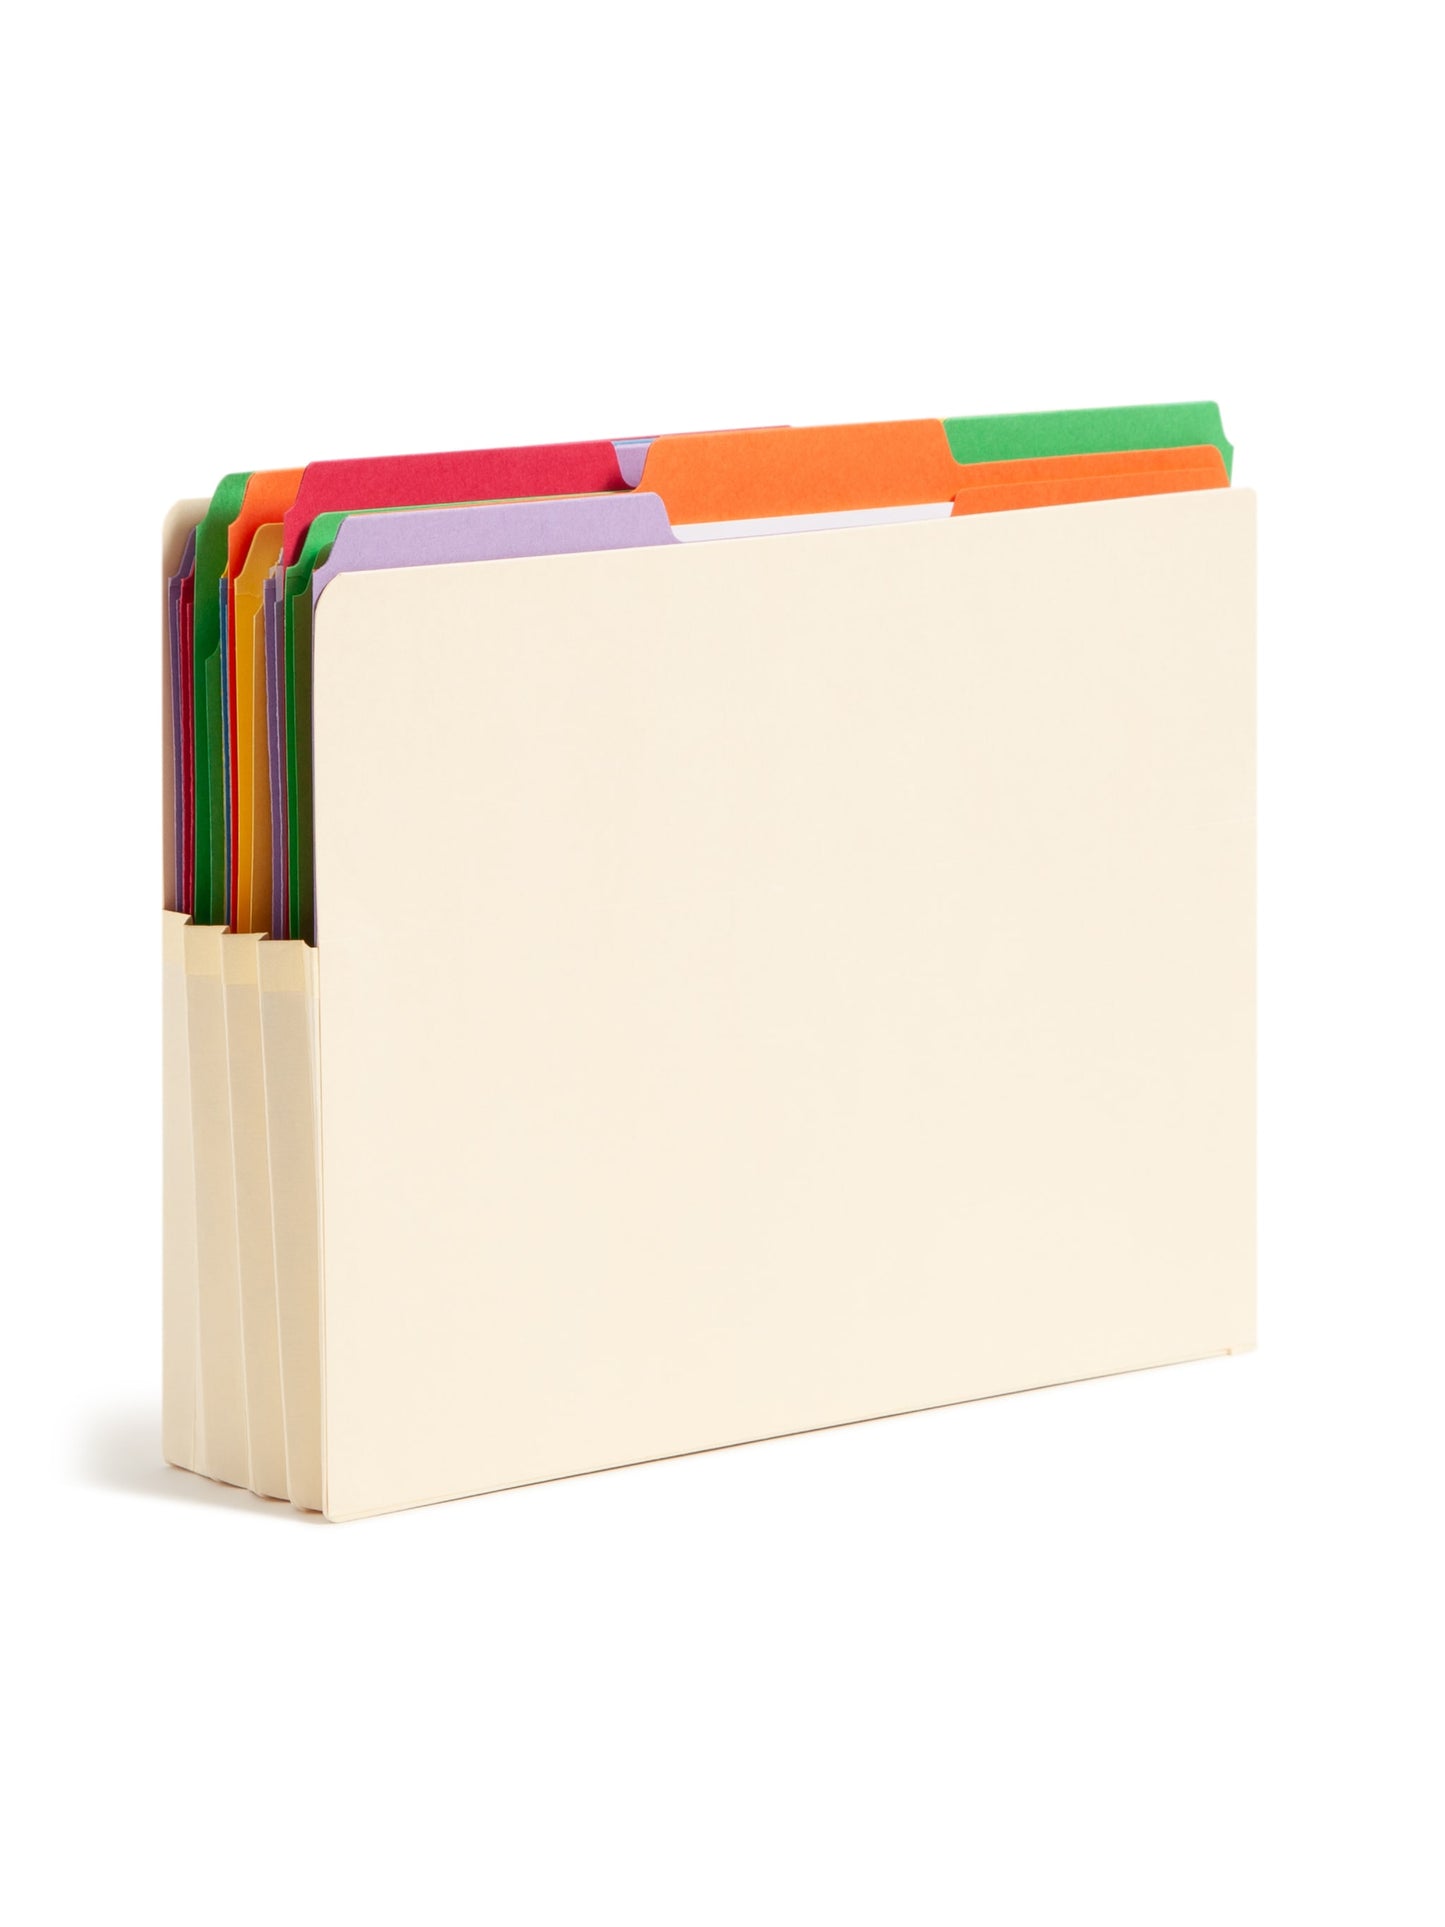 Reinforced End Tab File Pockets, Straight-Cut Tab, 3-1/2 inch Expansion, Manila Color, Letter Size, Set of 0, 30086486751248